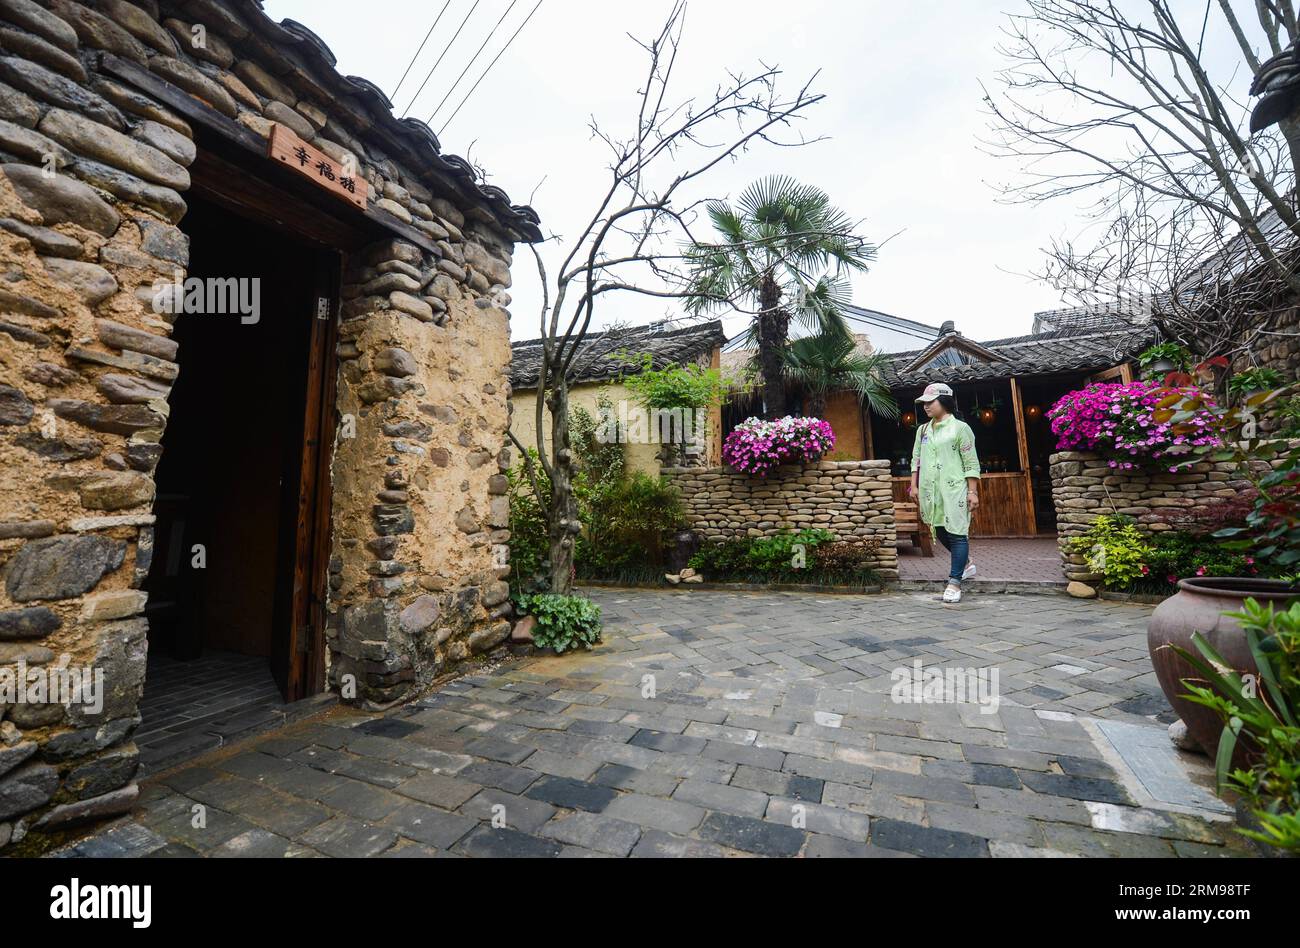 (140513) -- TONGLU, May 13, 2014 (Xinhua) -- A tourist visit the swinery tea bar in Dipu Village of Jiangnan Town in Tonglu County, east China s Zhejiang Province, May 13, 2014. Dipu Village, a national historical and cultural village with nearly a thousand years history, has committed to environment reform, village protection and tourism development for the past few years. The swinery tea bar sets a successful example of the transform. The bar used to be five messy stone houses for pigs keeping. After renovation, it functions as a modern tea bar with traditional appearance, attracting many to Stock Photo